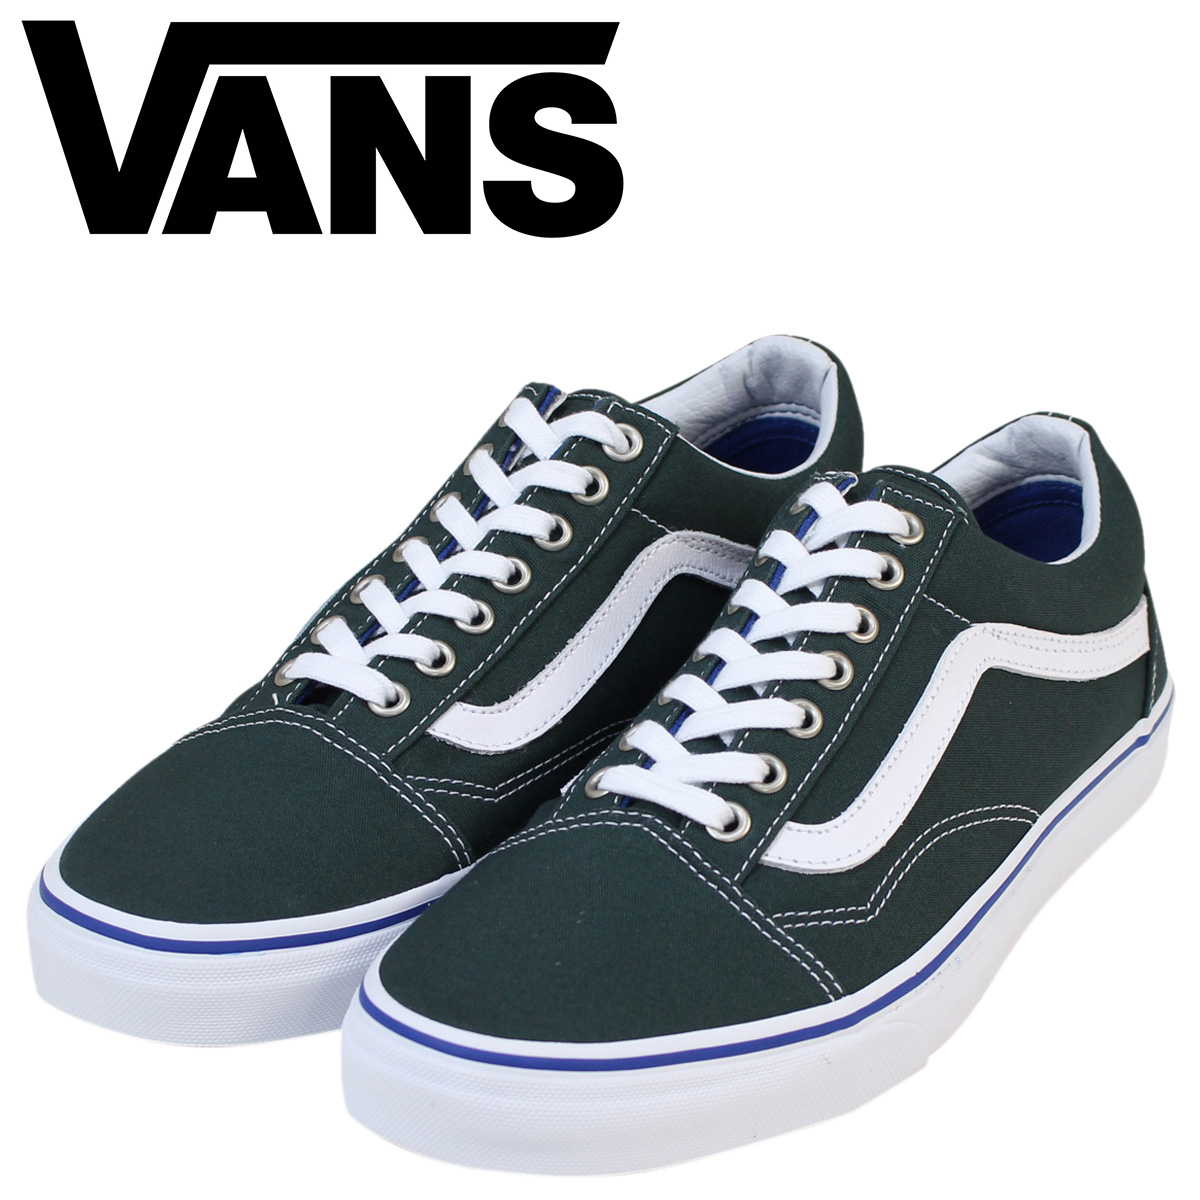 how much are vans shoes